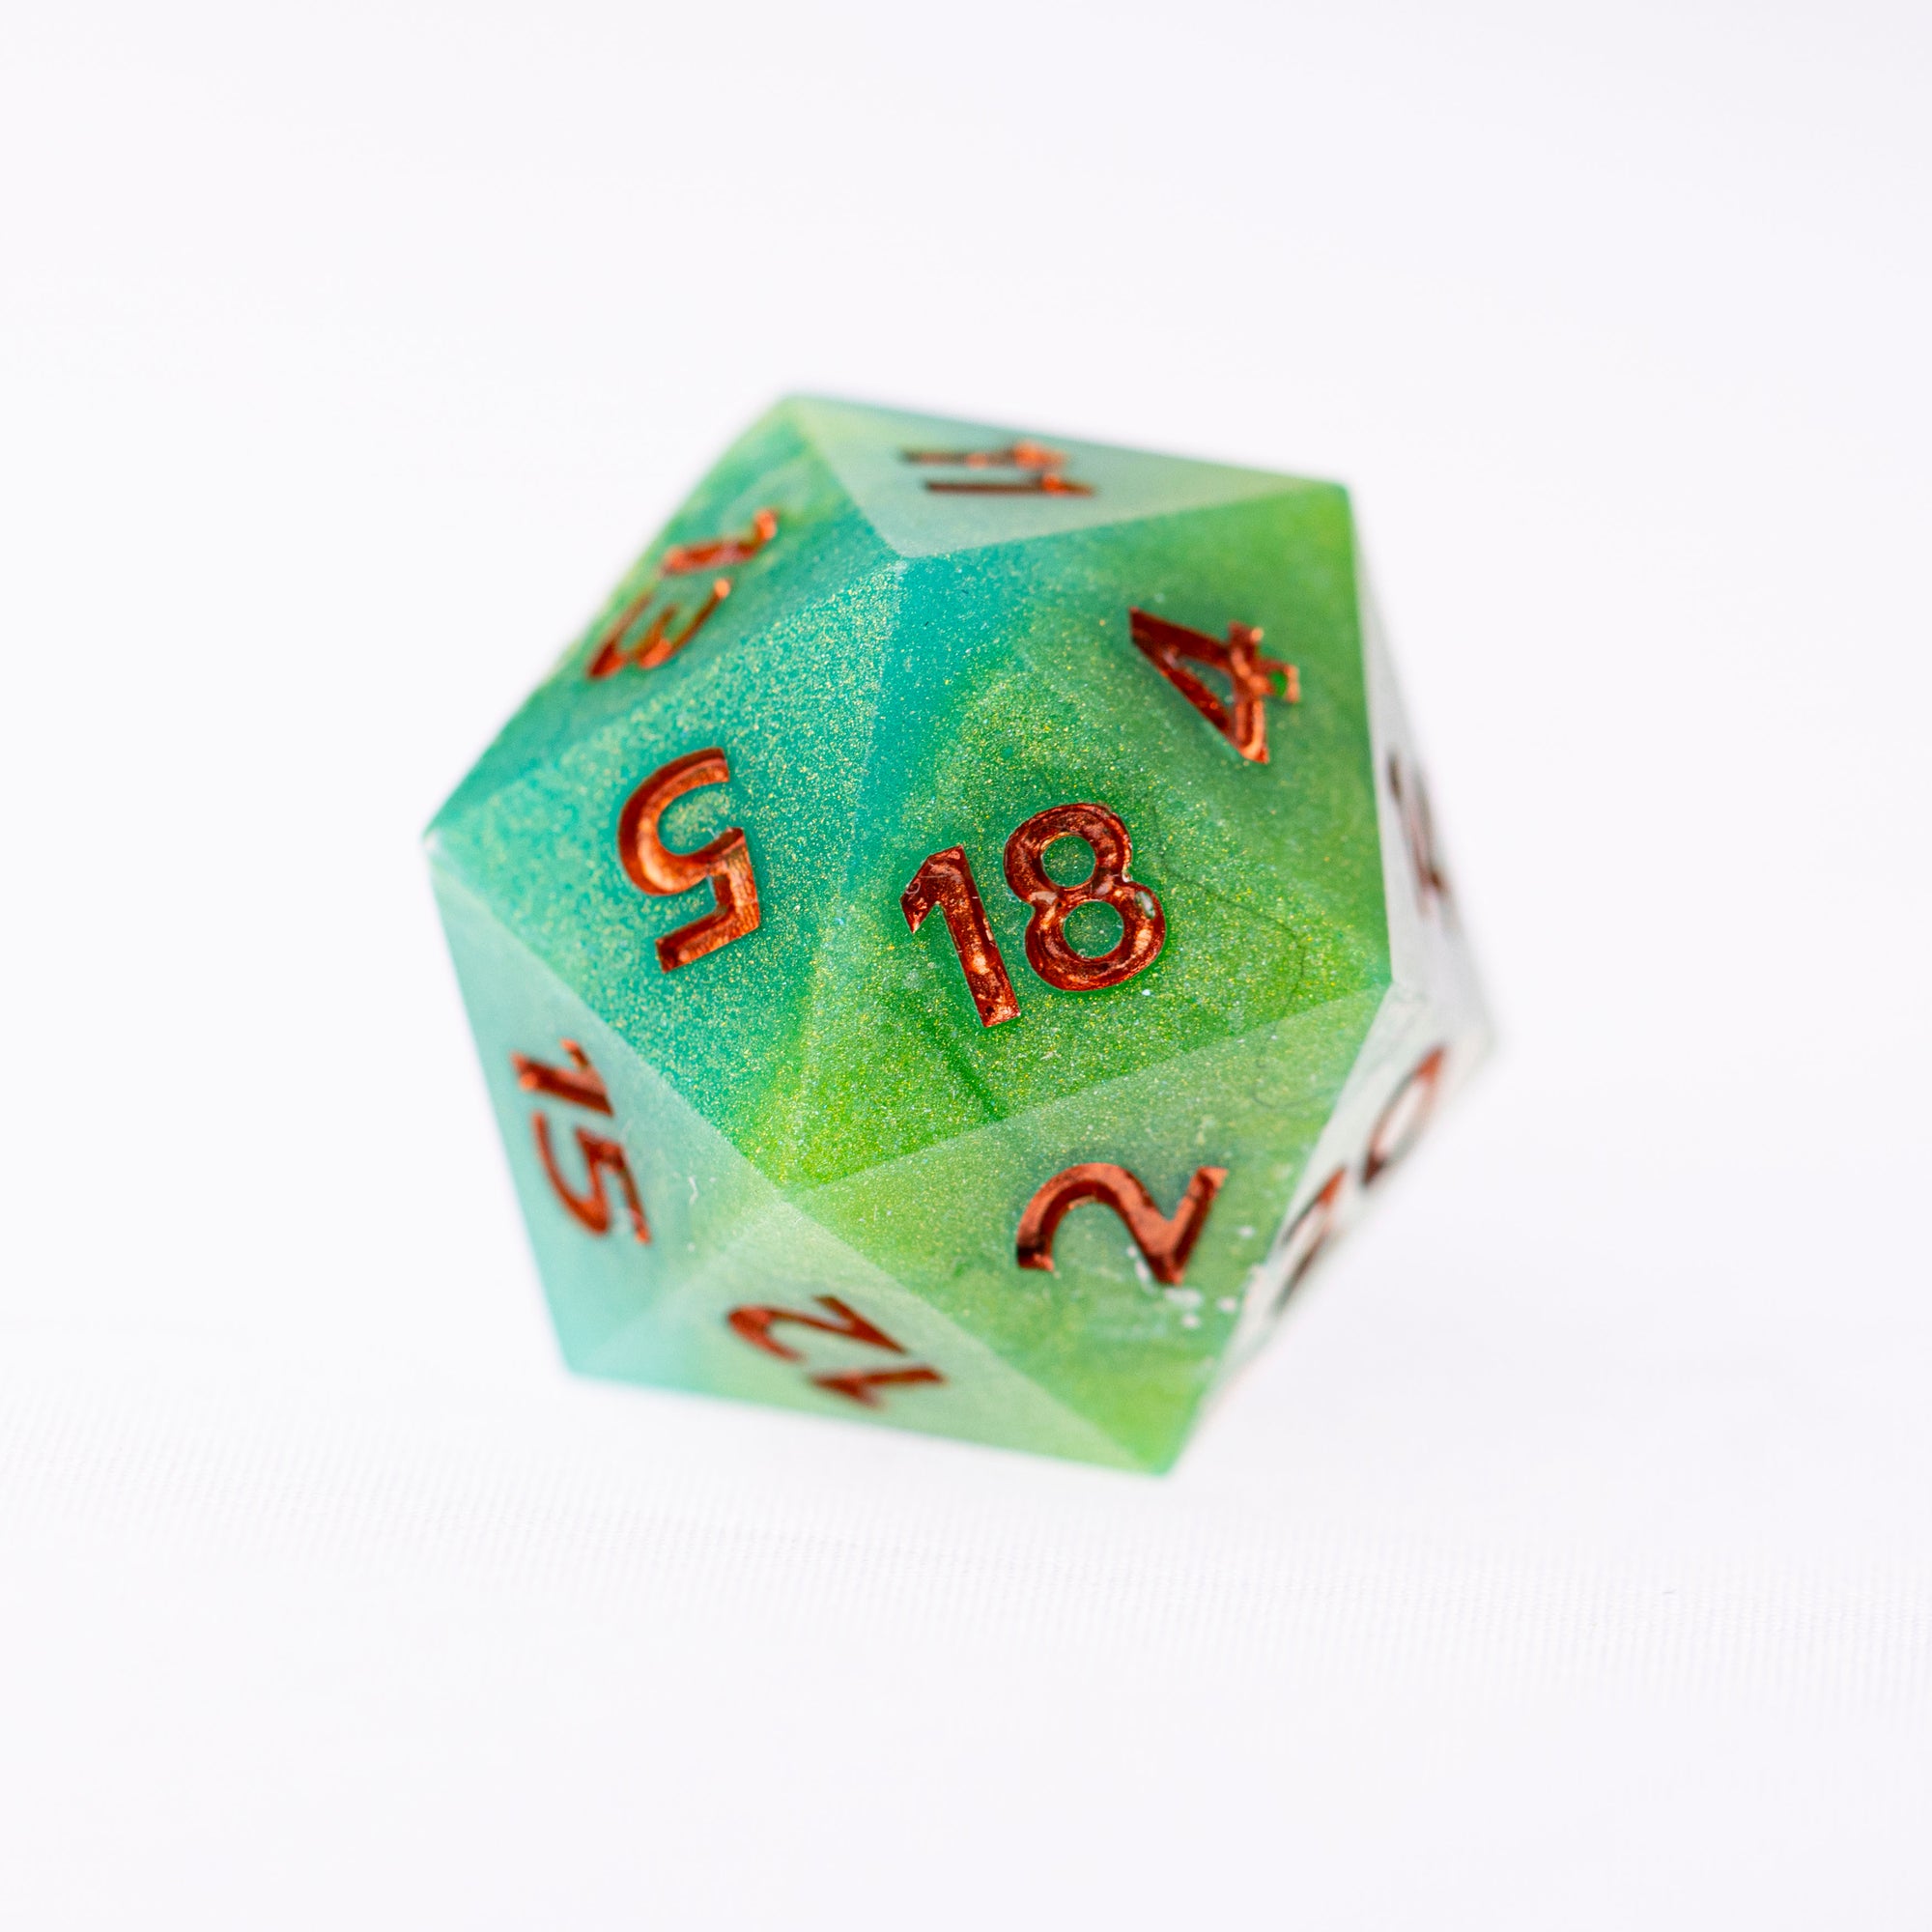 The Ethereal Emerald - D20 + D6 + D4 Dice Sets